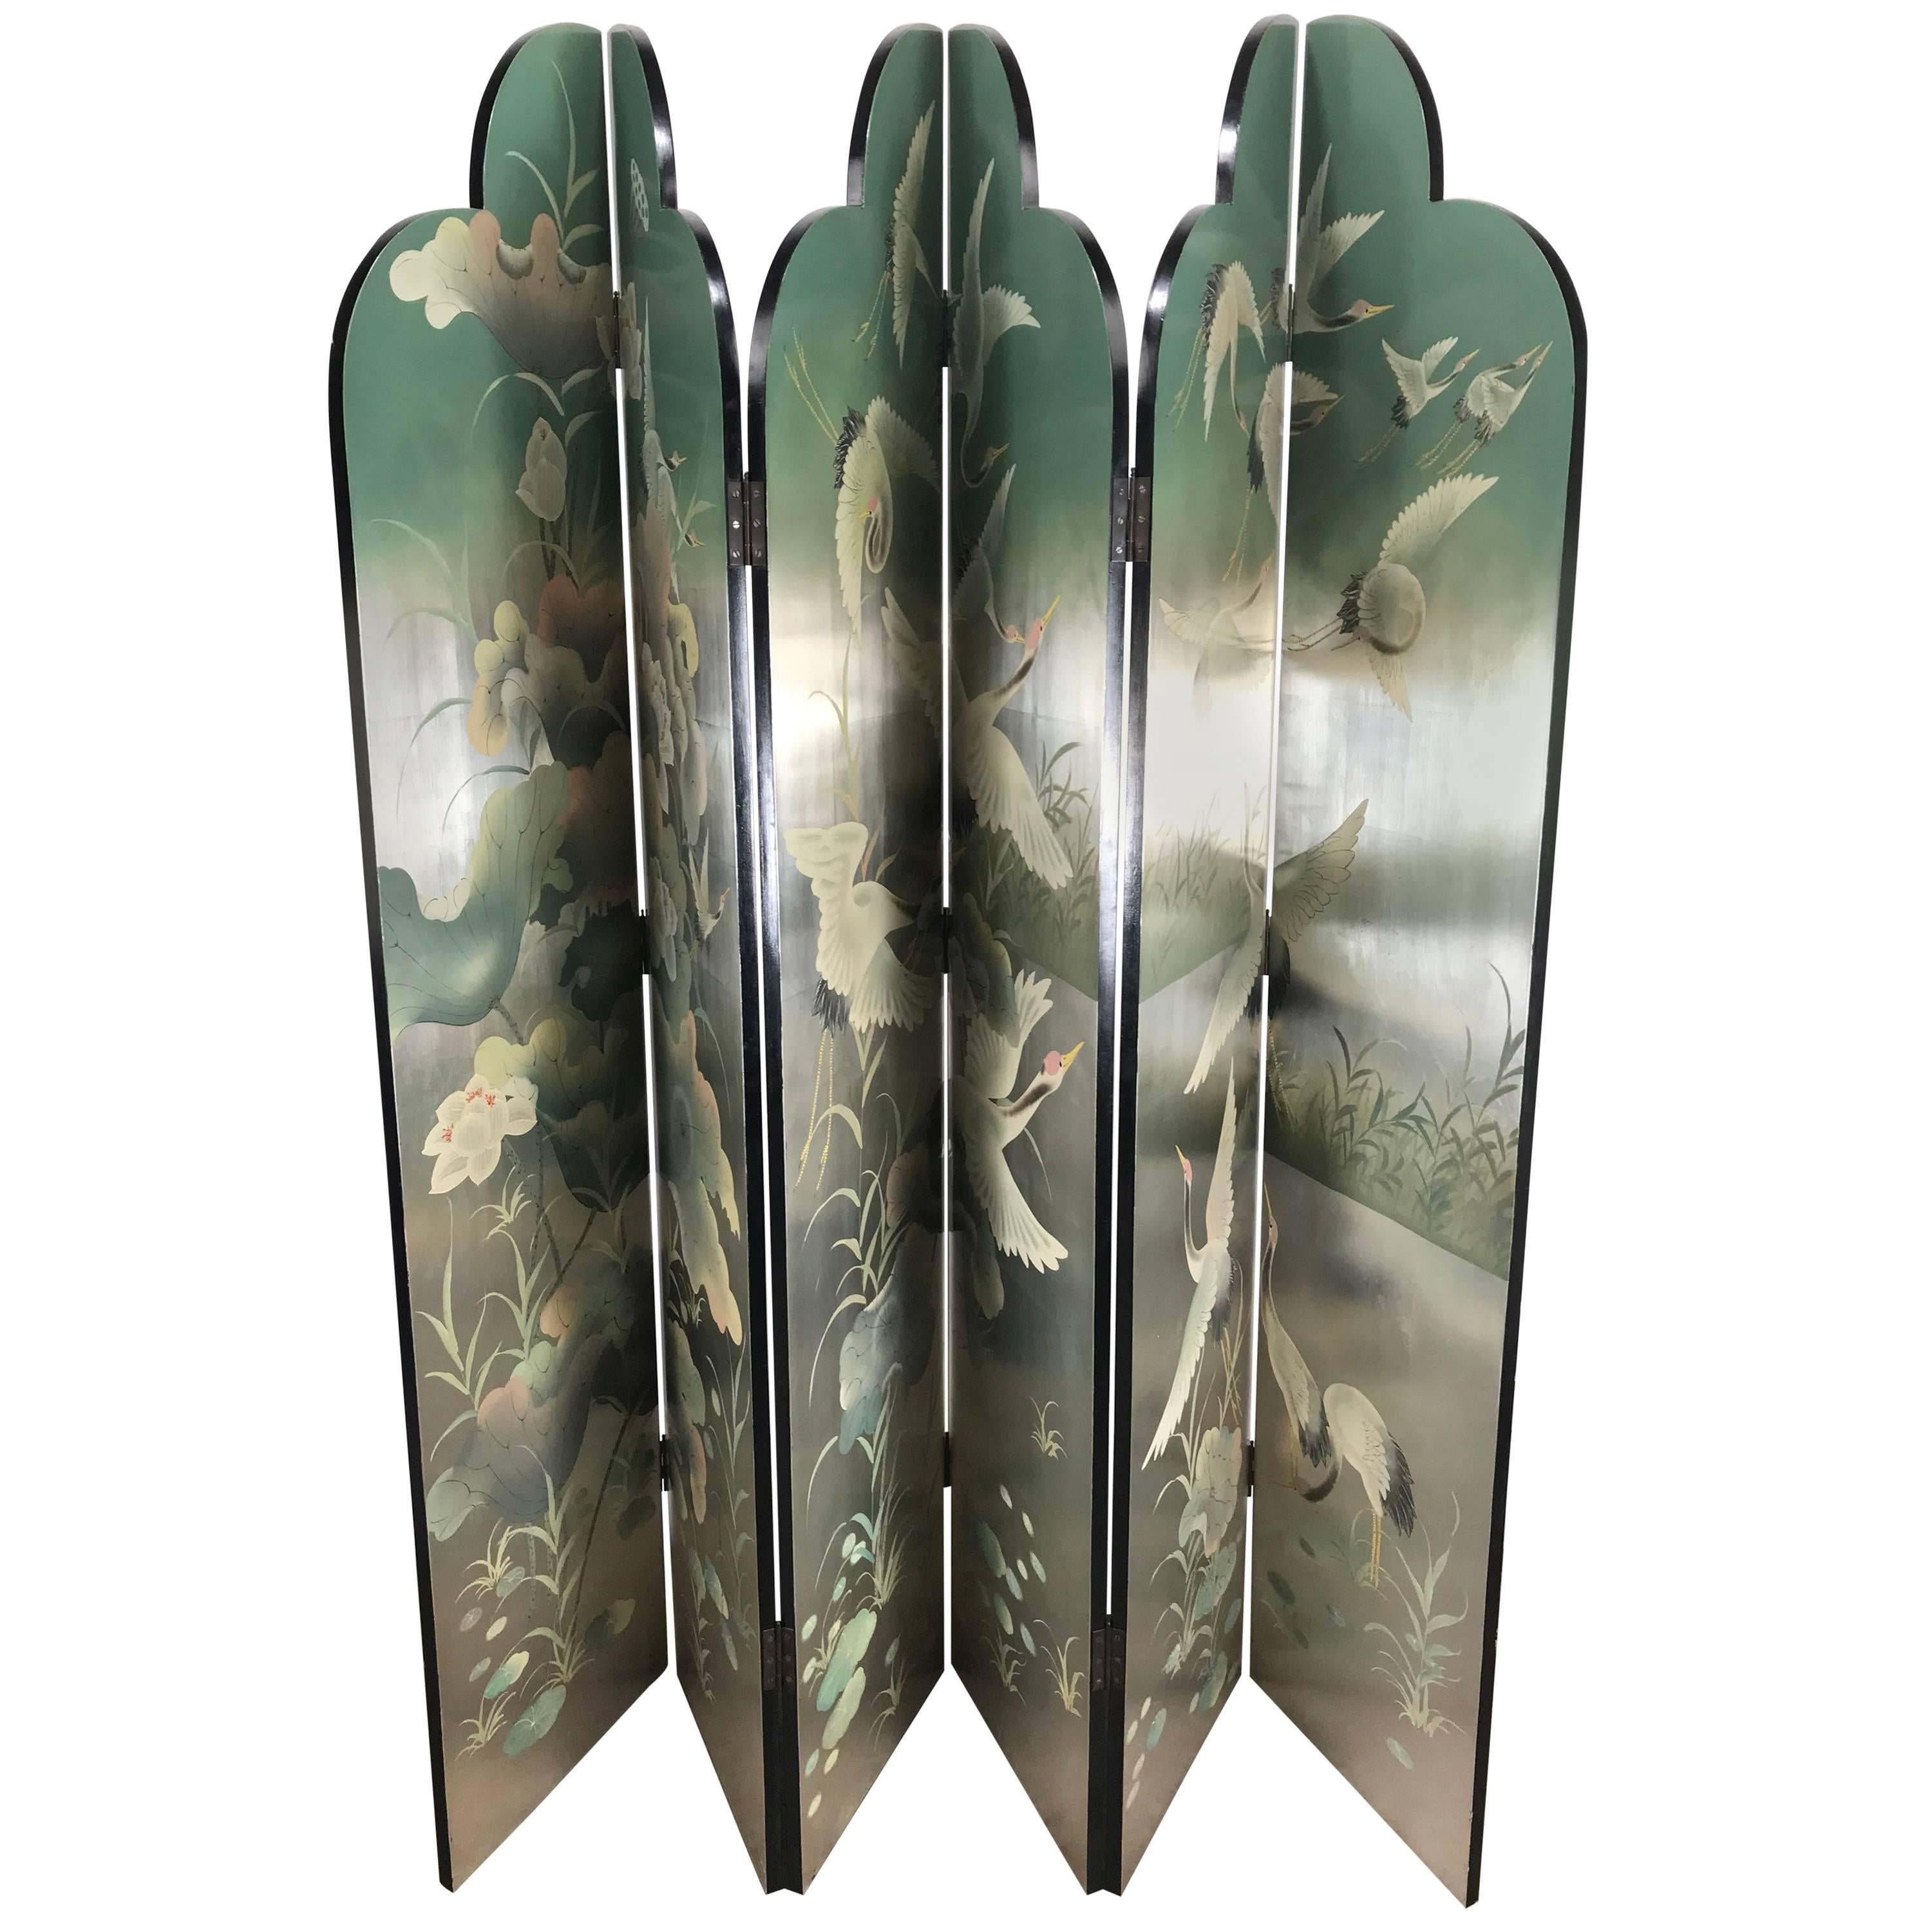 Outstanding Six Panel Double-Sided Asian Screen or Room Divider, Silver Leaf